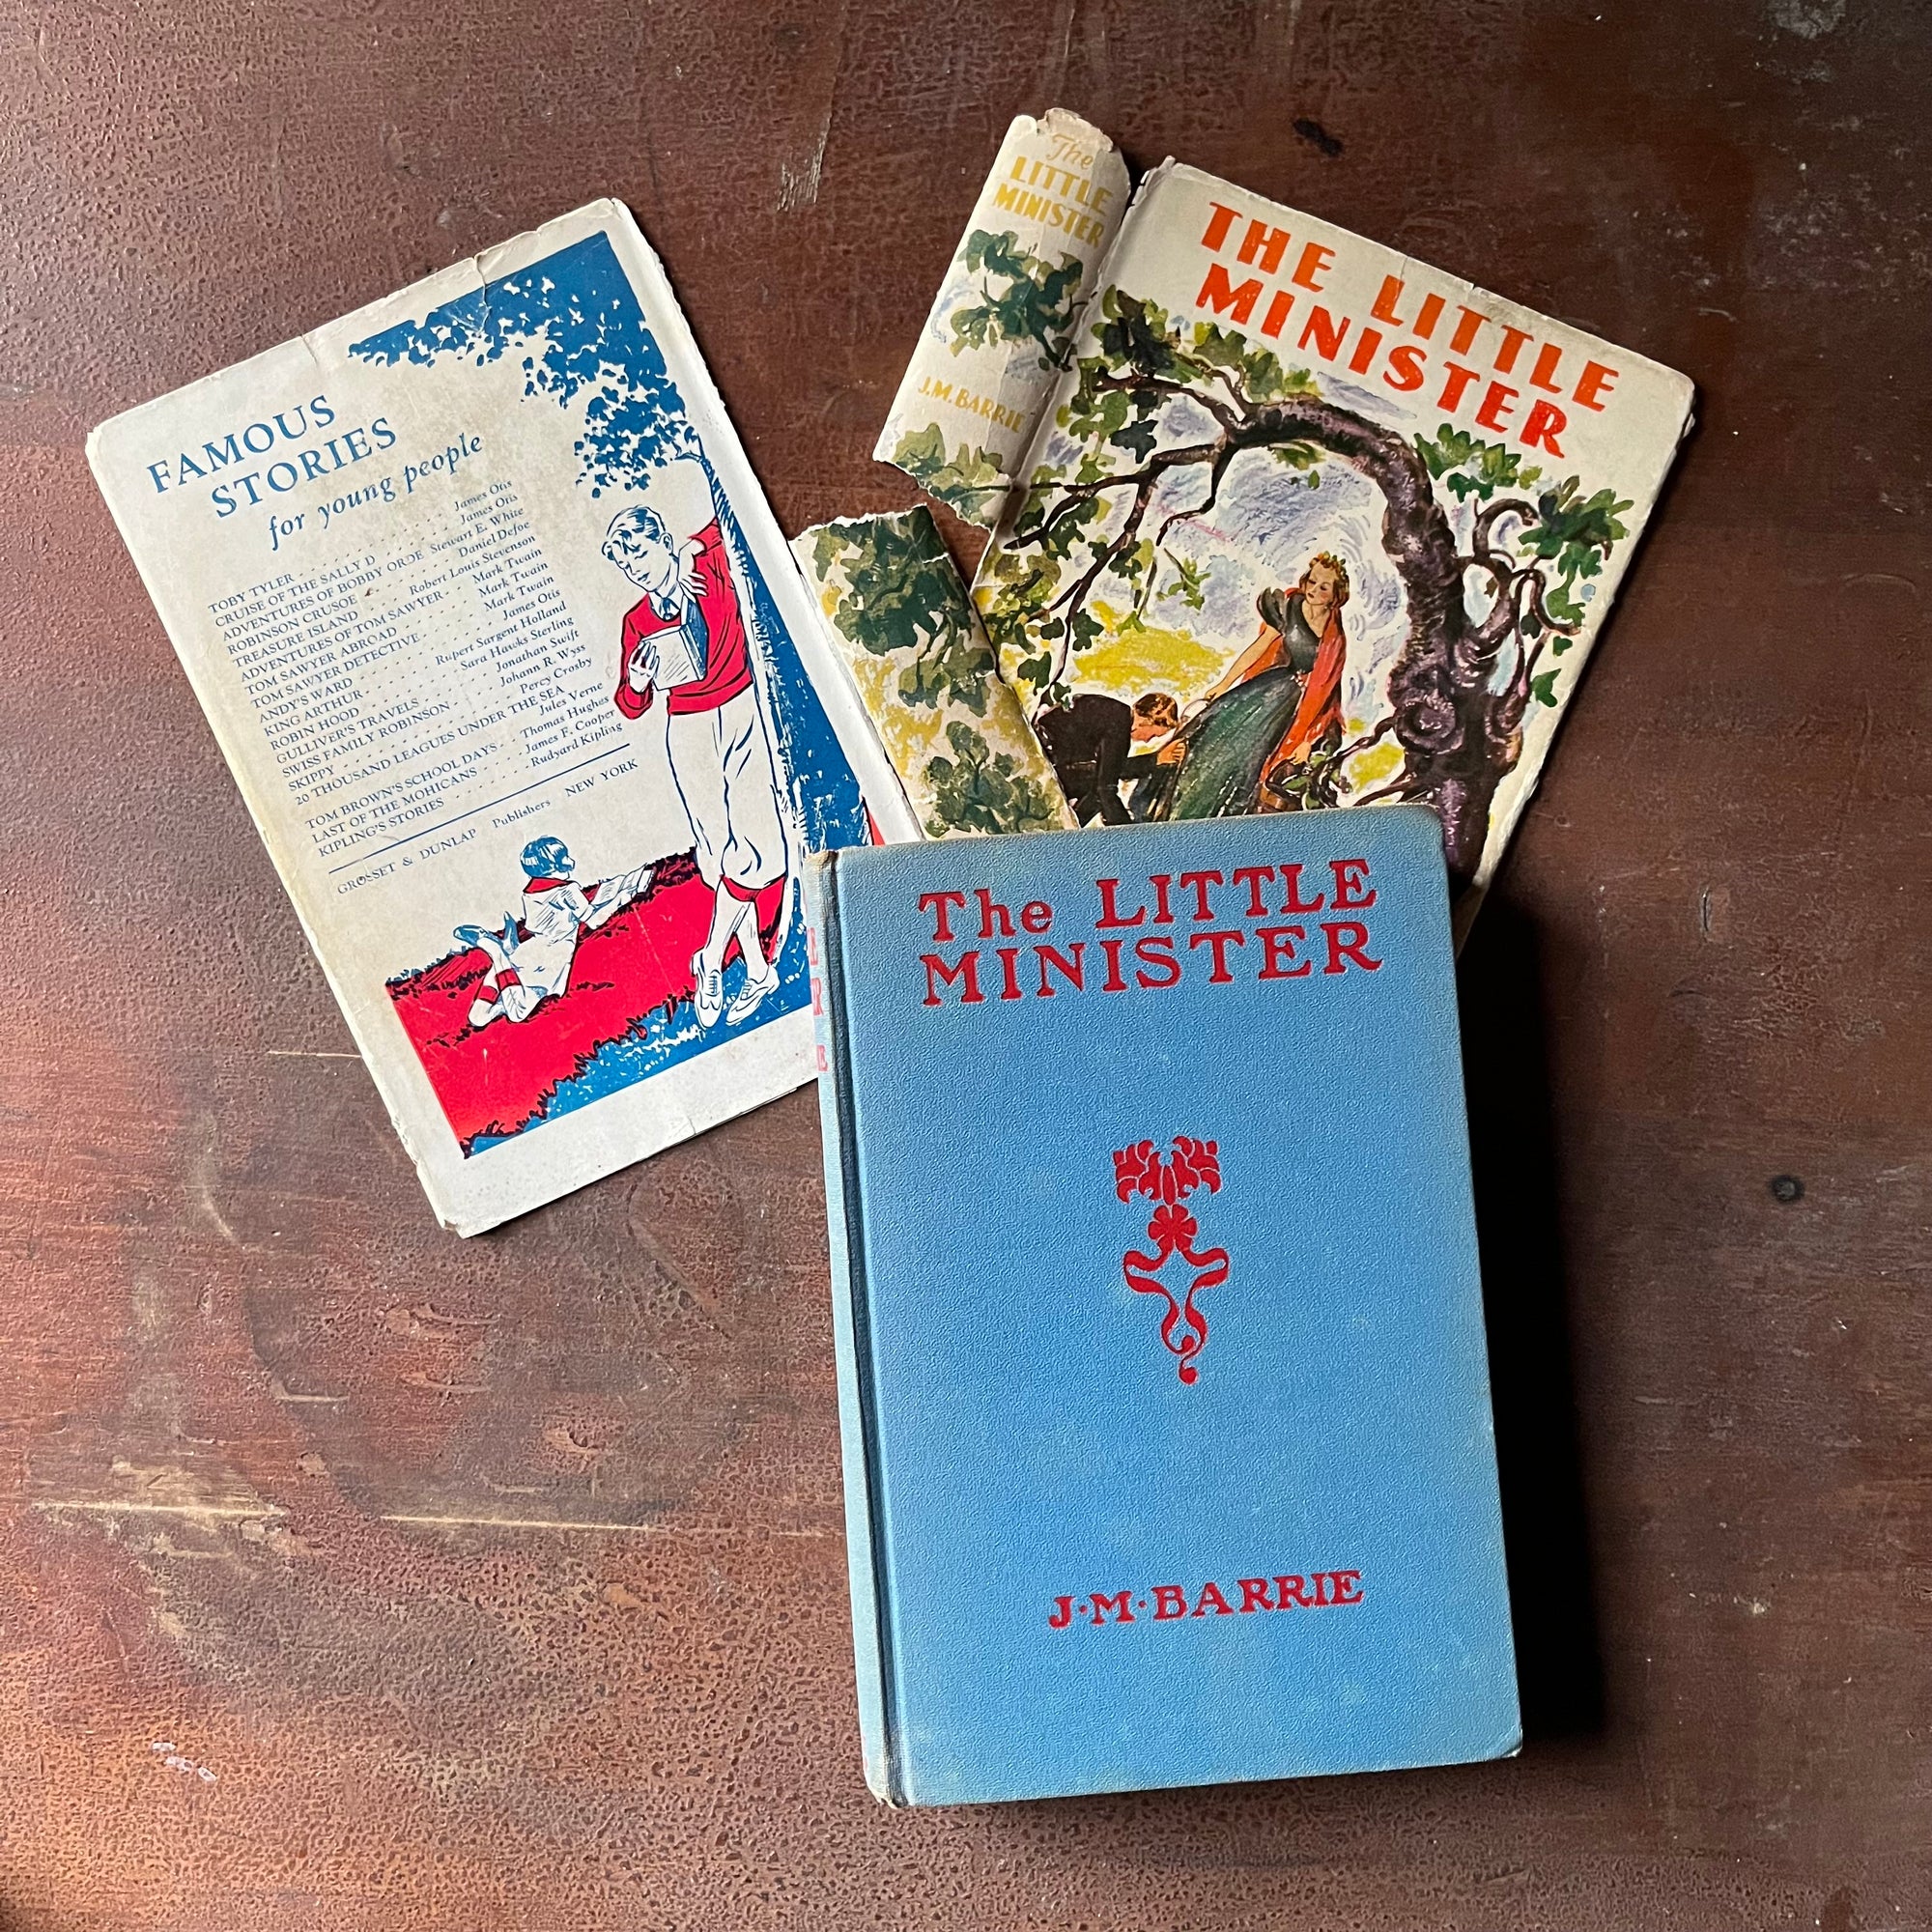 The Little Minister by James M. Barrie - view of the front cover & both halves of the dust jacket